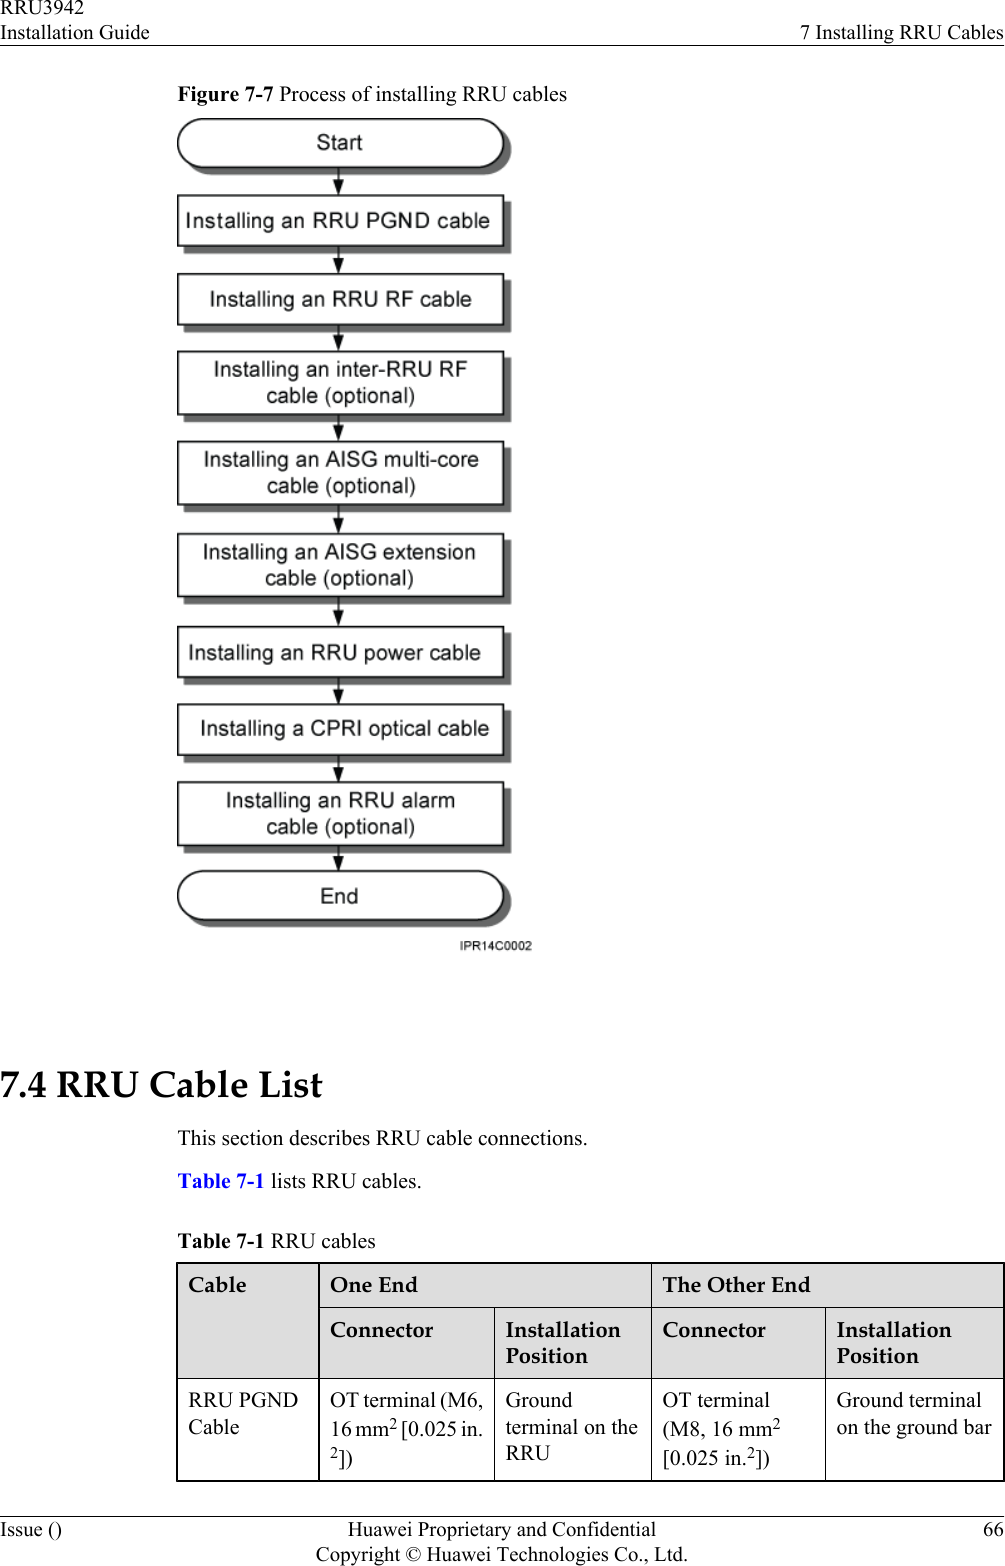 Figure 7-7 Process of installing RRU cables 7.4 RRU Cable ListThis section describes RRU cable connections.Table 7-1 lists RRU cables.Table 7-1 RRU cablesCable One End The Other EndConnector InstallationPositionConnector InstallationPositionRRU PGNDCableOT terminal (M6,16 mm2 [0.025 in.2])Groundterminal on theRRUOT terminal(M8, 16 mm2[0.025 in.2])Ground terminalon the ground barRRU3942Installation Guide 7 Installing RRU CablesIssue () Huawei Proprietary and ConfidentialCopyright © Huawei Technologies Co., Ltd.66